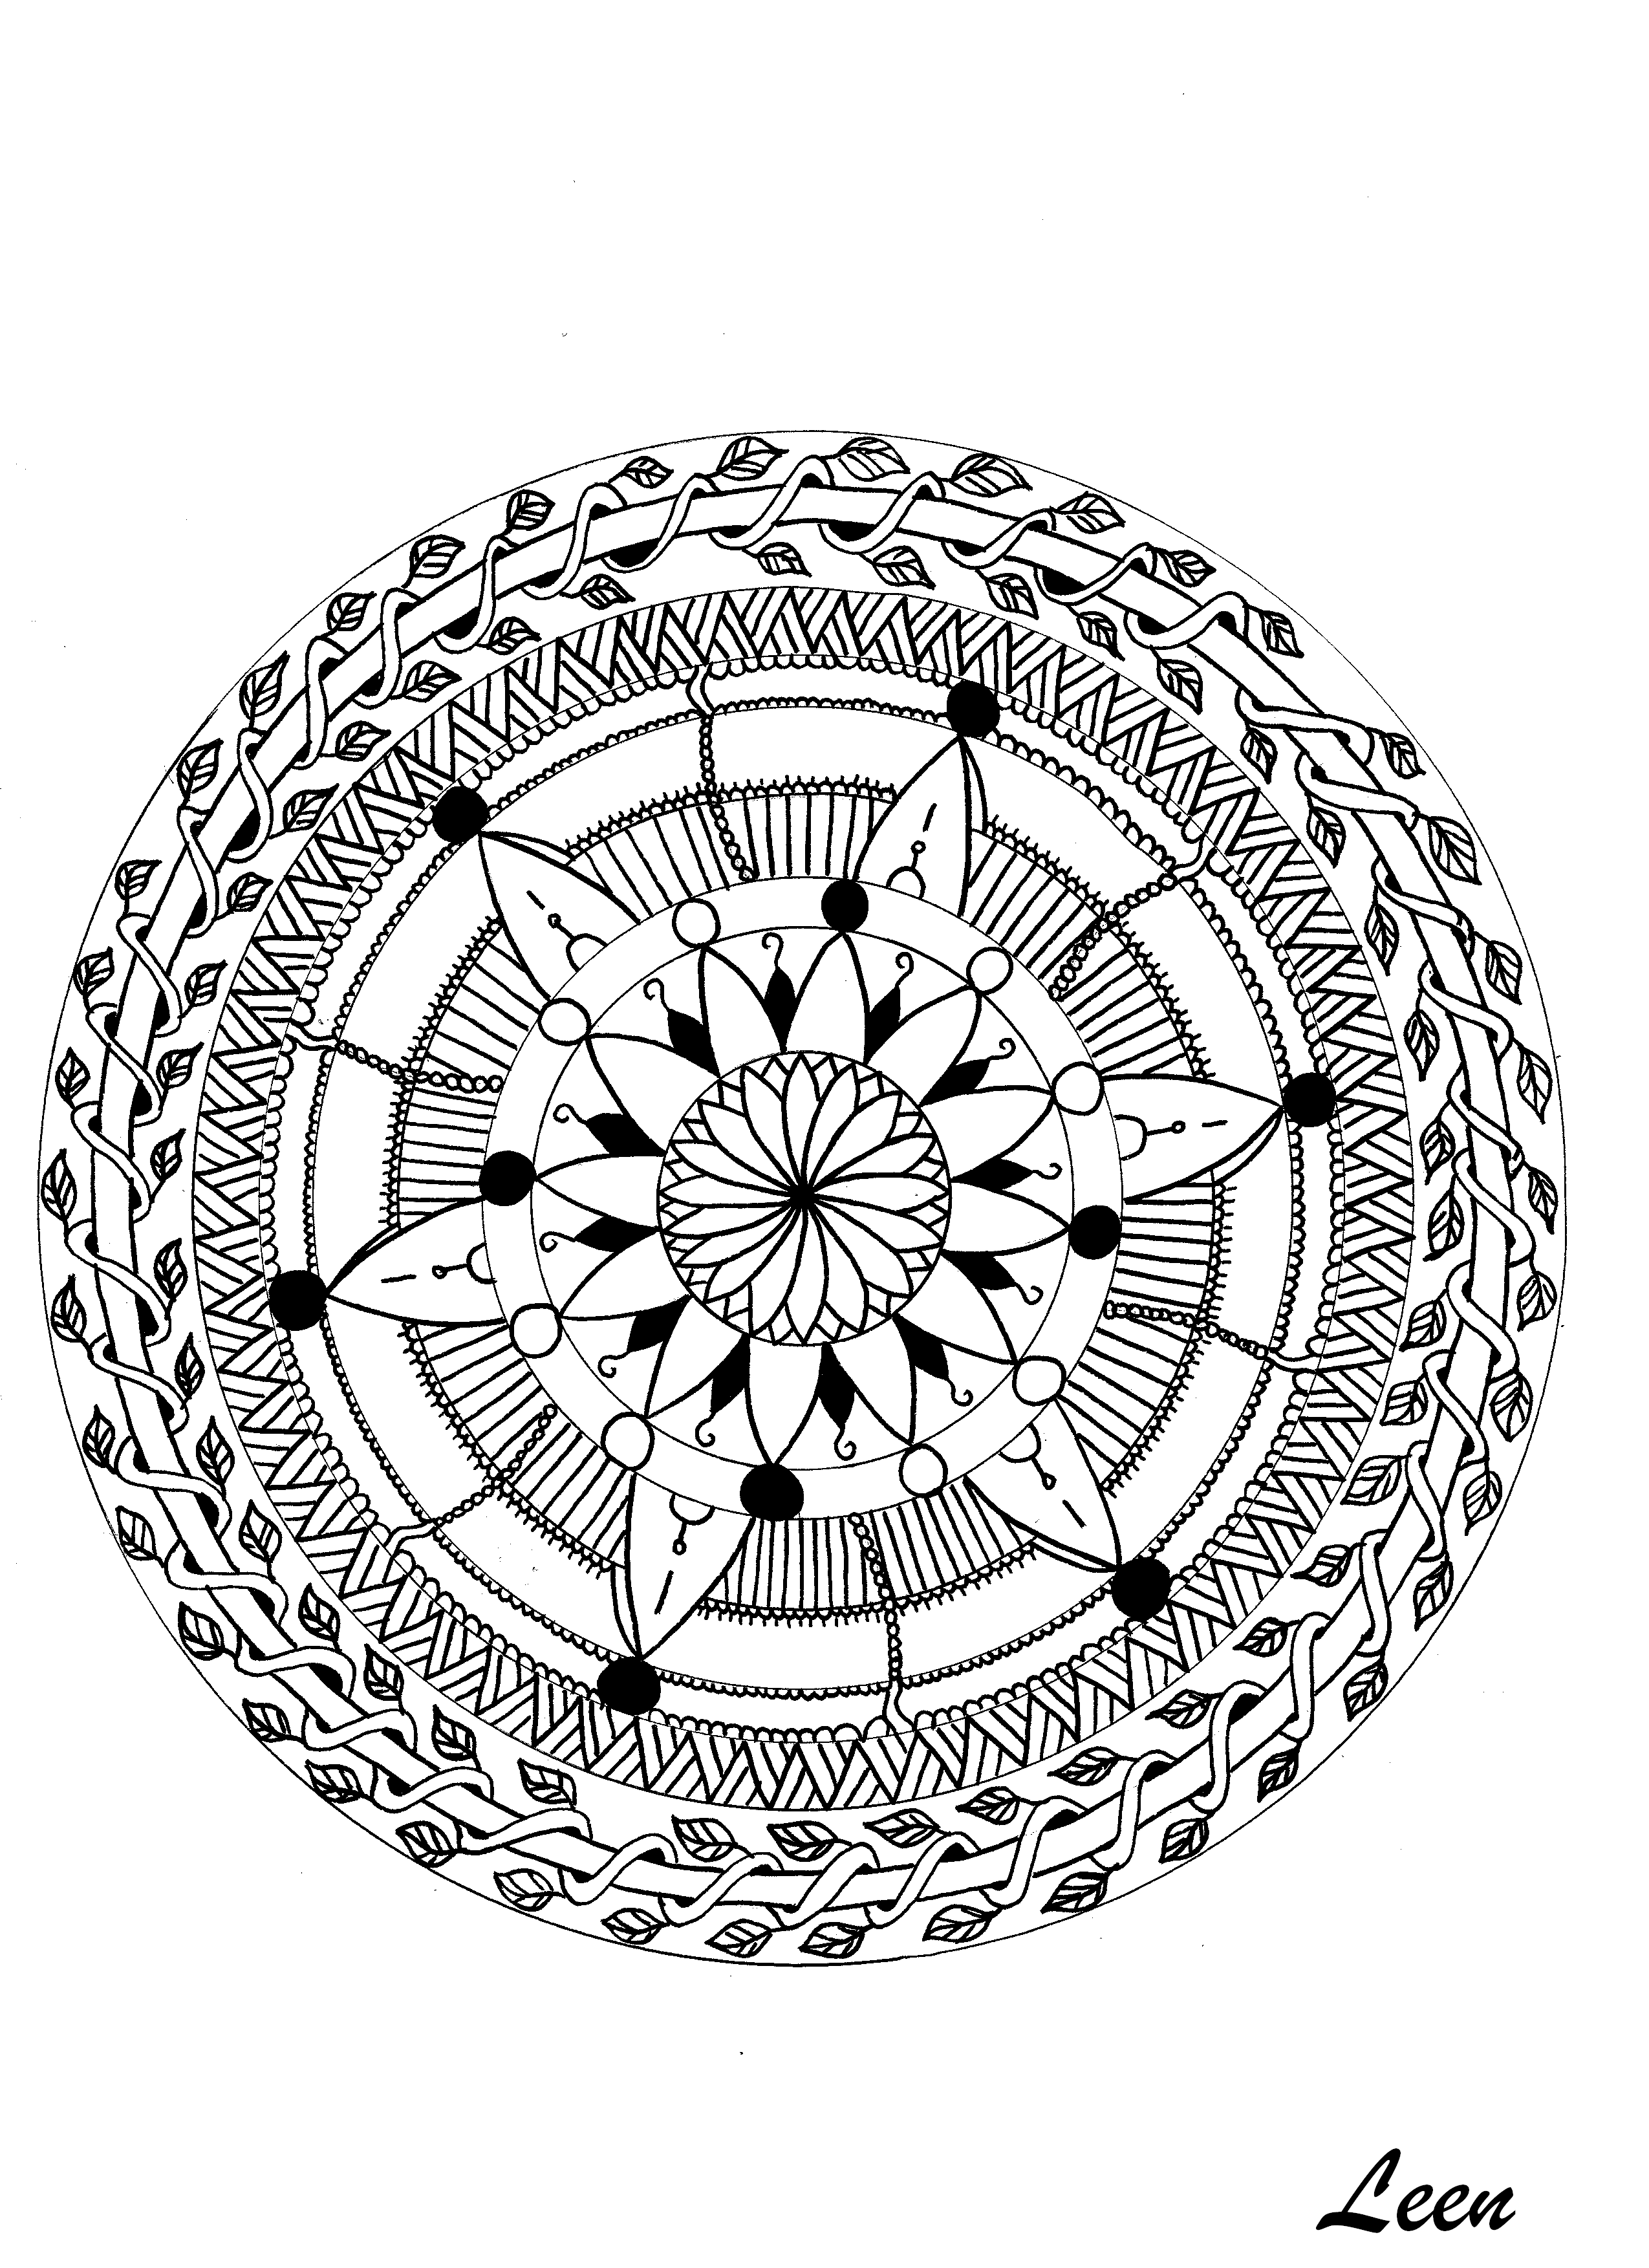 If you are ready to color during a long time, get ready to color this incredible Mandala coloring page ... You can use the colors you prefer.